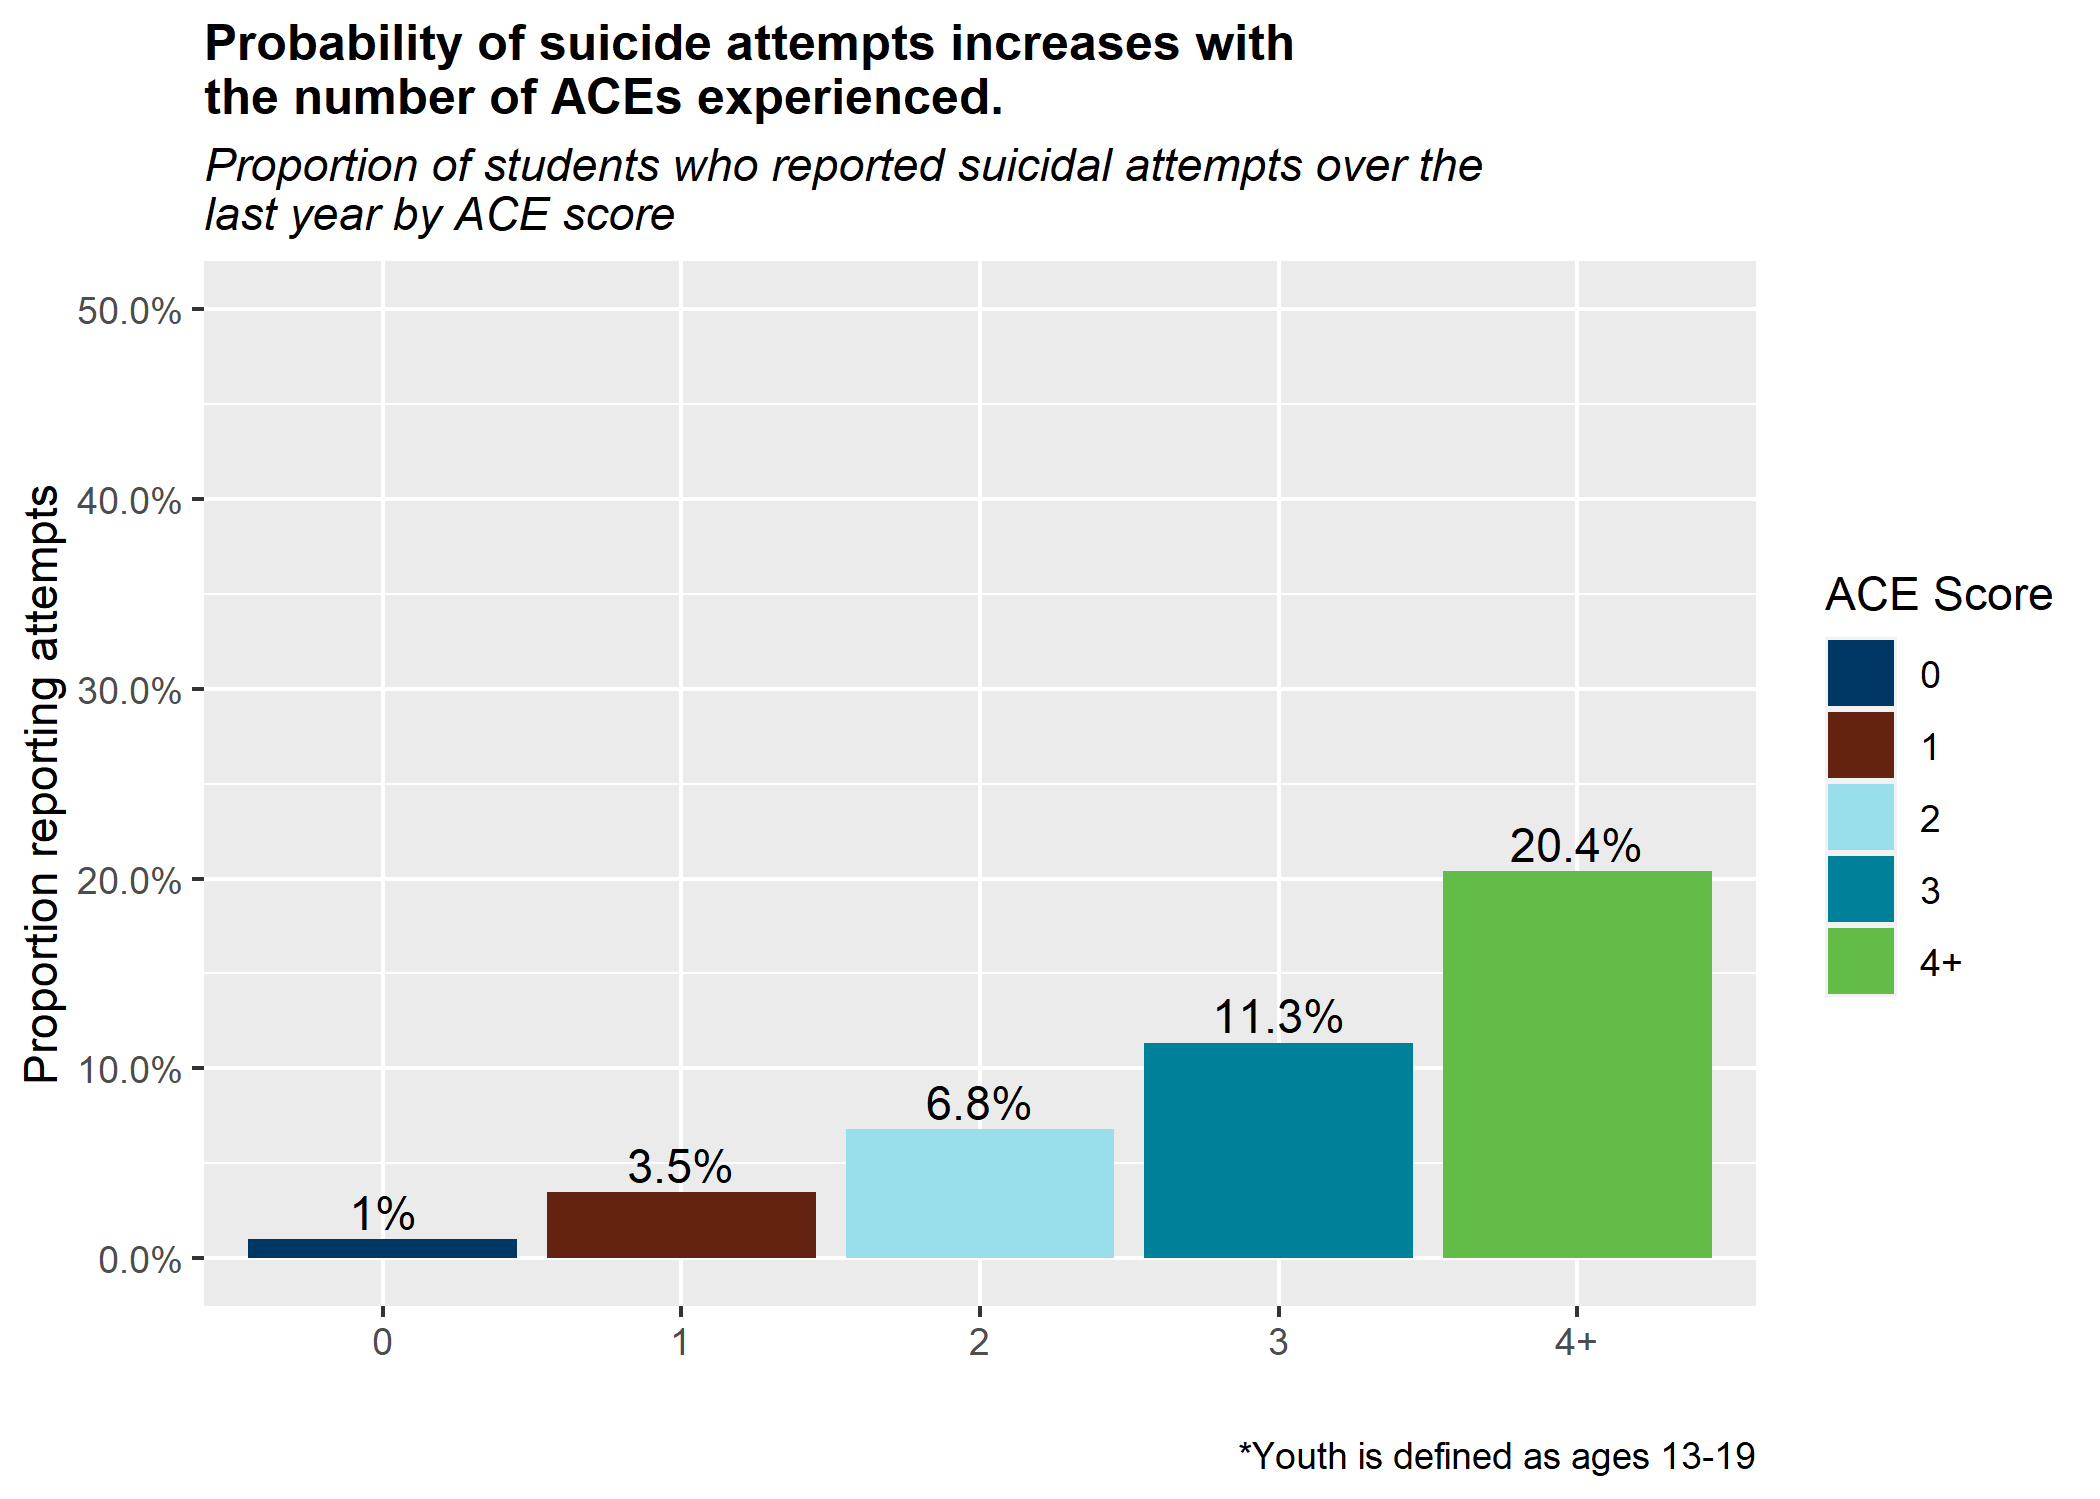 Probability of suicide attempts increases with ACEs. 